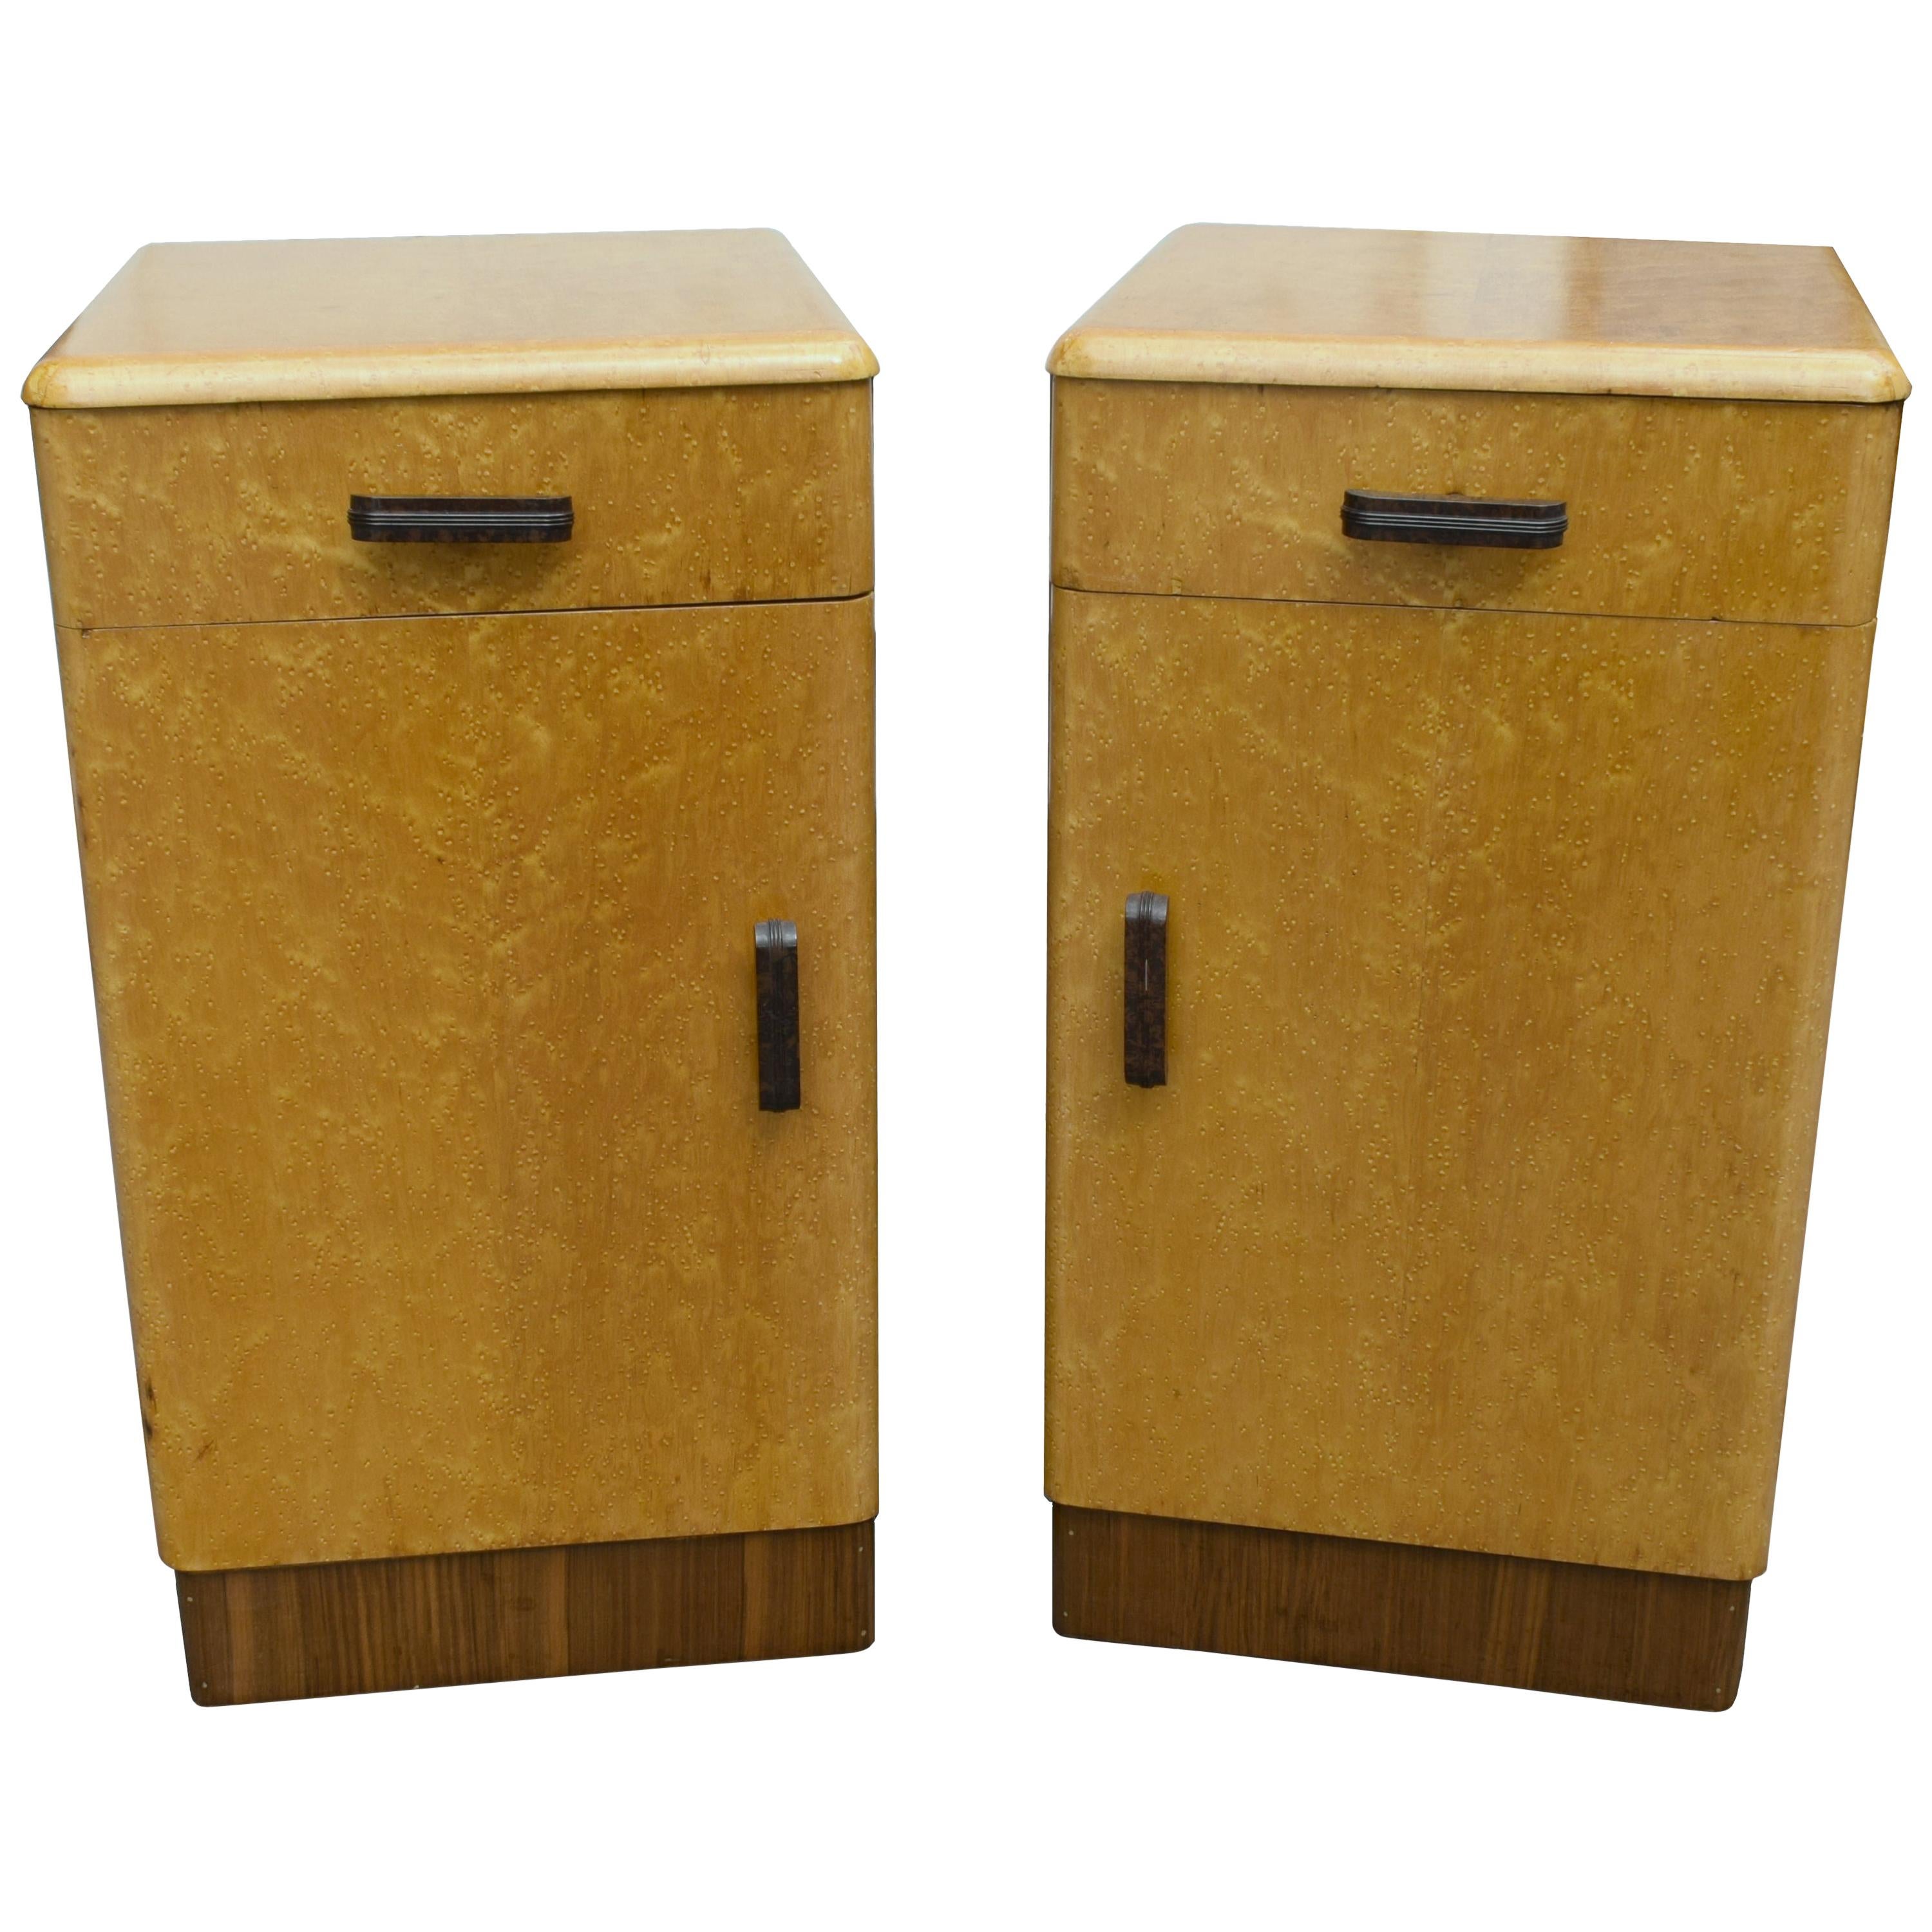 Pair of Matching 1930s Art Deco Bedside Cabinet Tables in Blonde Maple